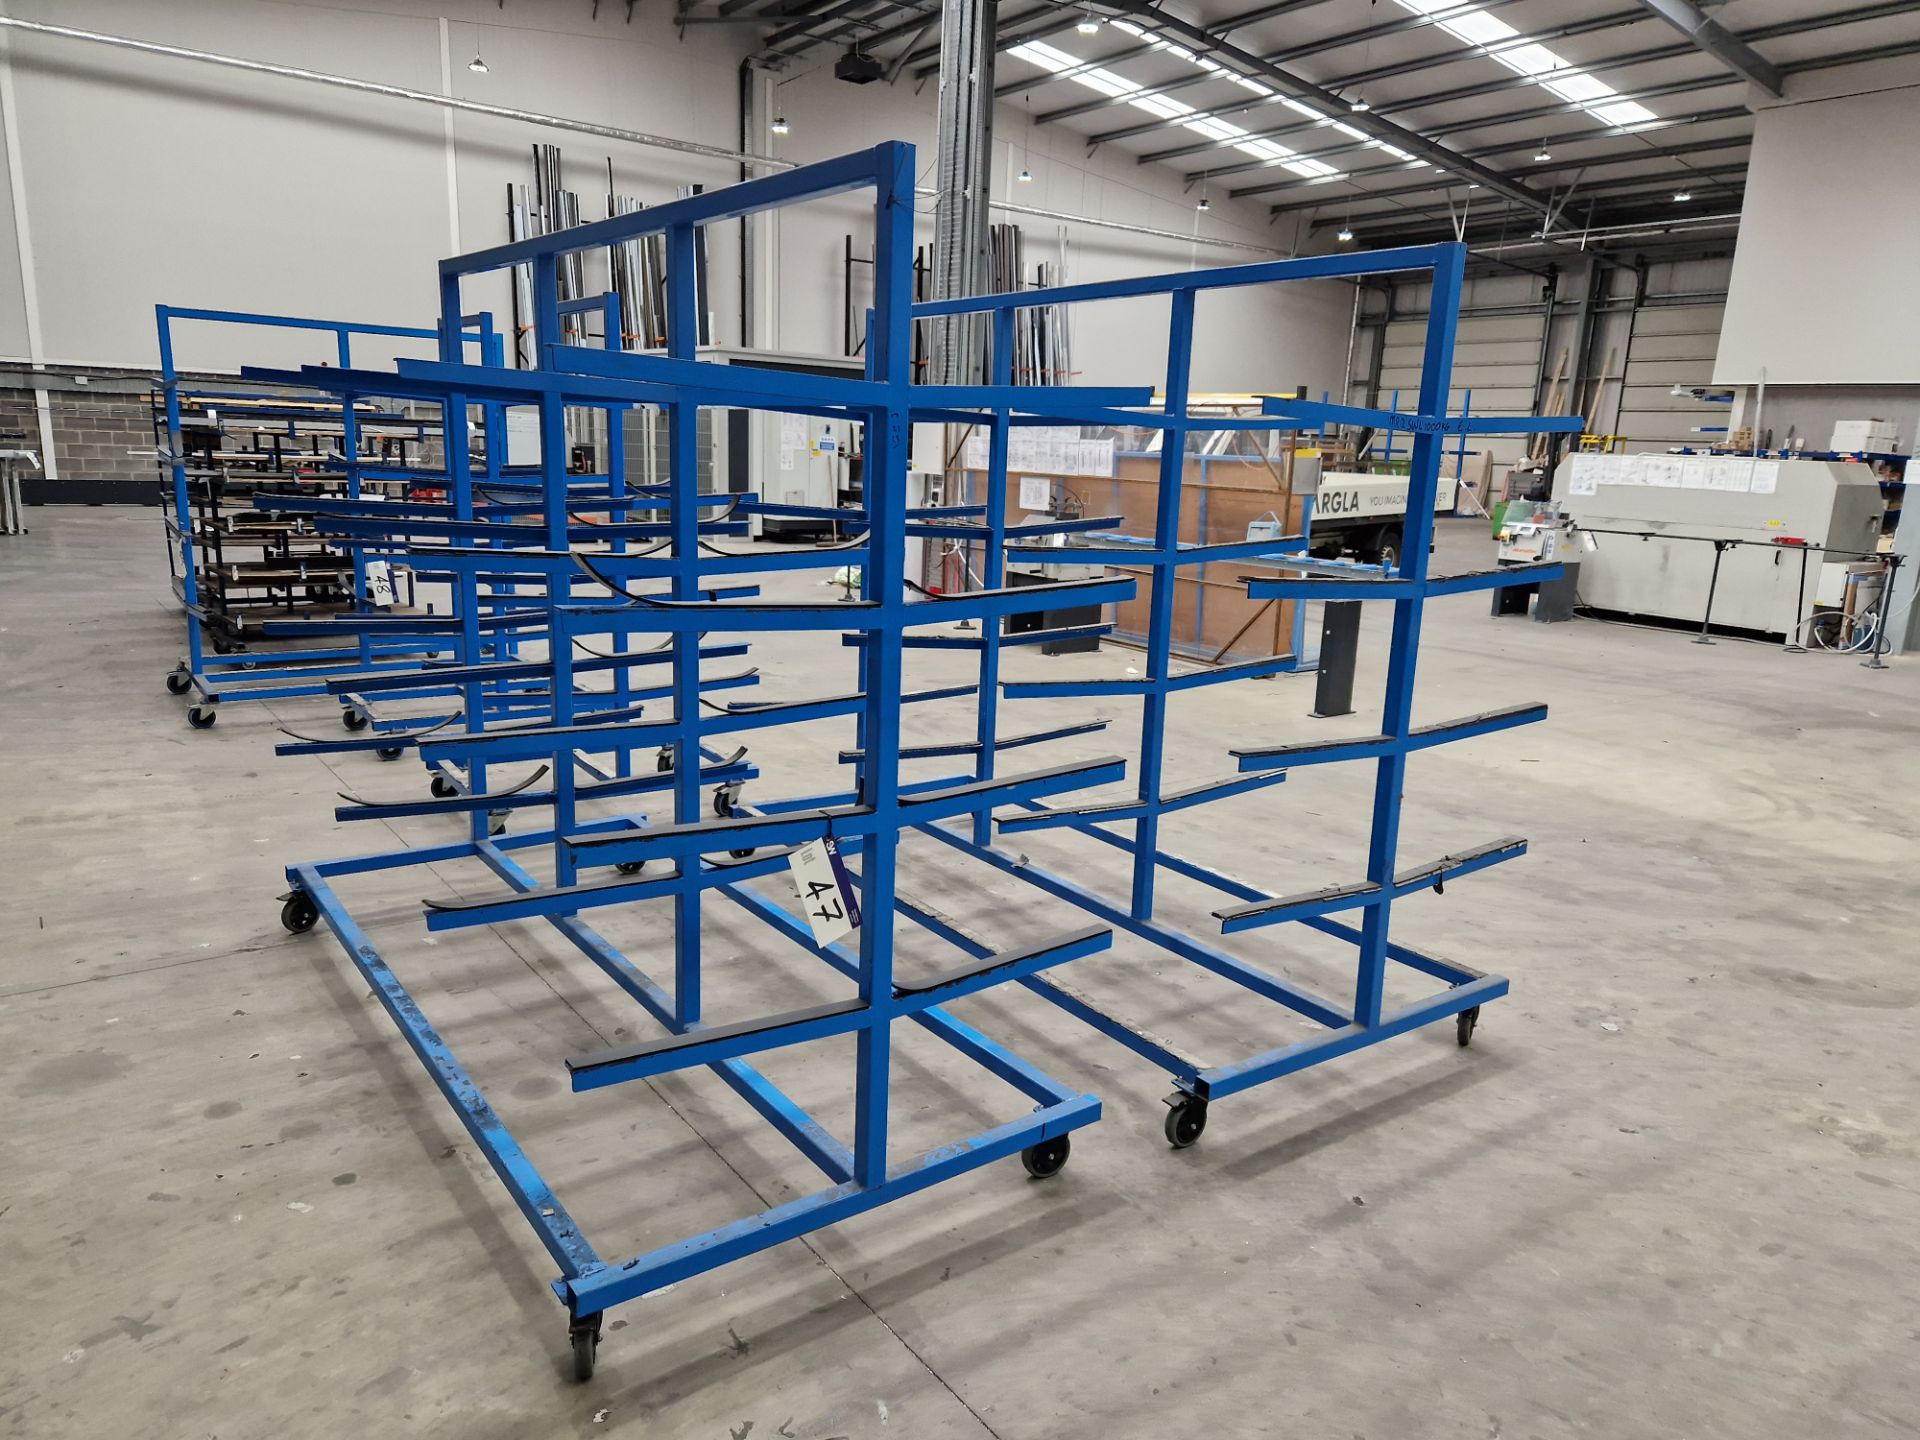 Two 4 Tier Double Sided Mobile Profile/Stock Racks, Approx. 2.8m x 1.2m x 2.2m Please read the